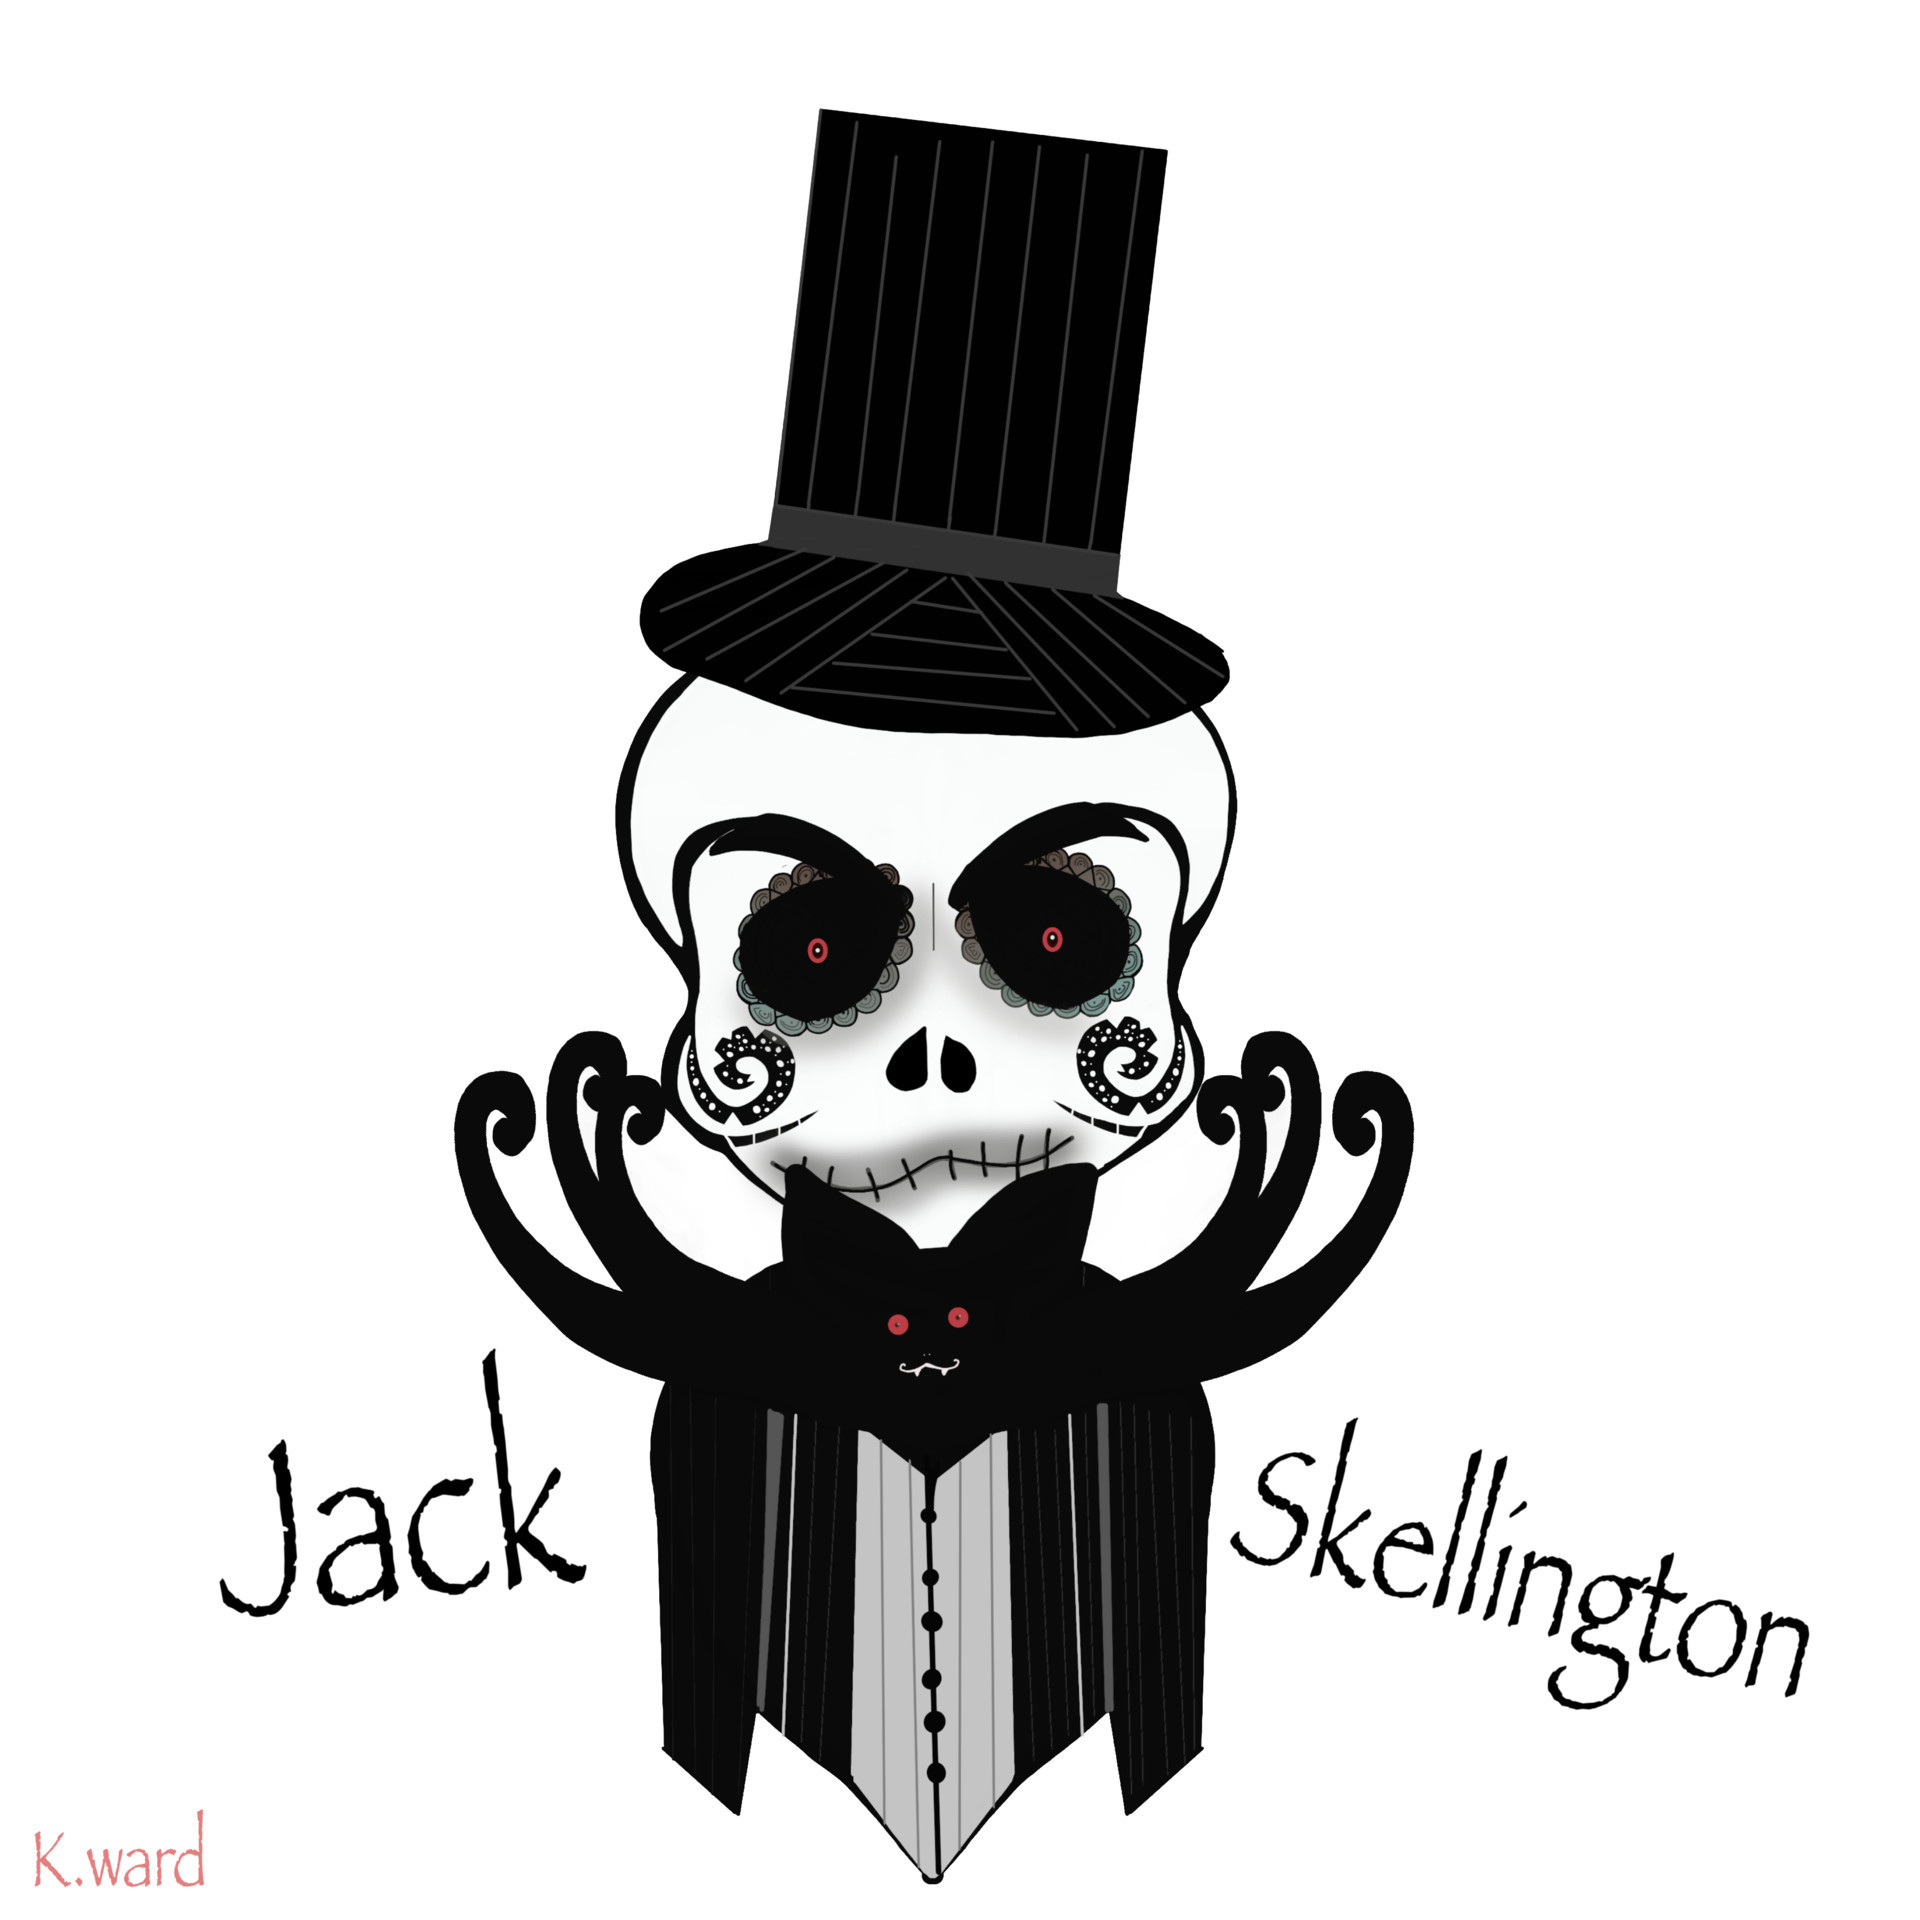 1920x1920 Jack skellington with out background